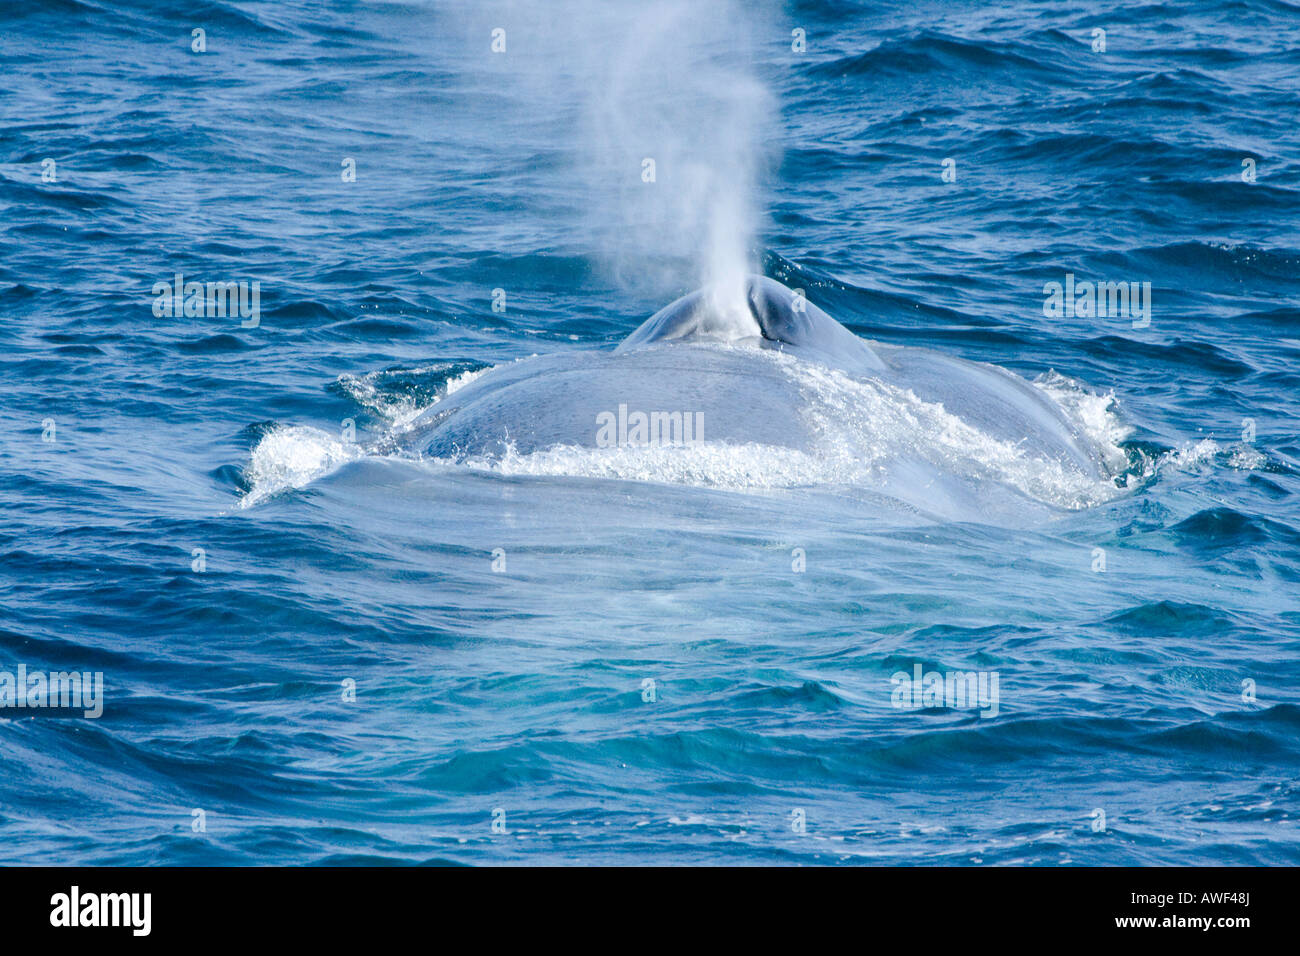 A blue whale, Balaenoptera musculus, surfaces off the coast of California, USA. Stock Photo